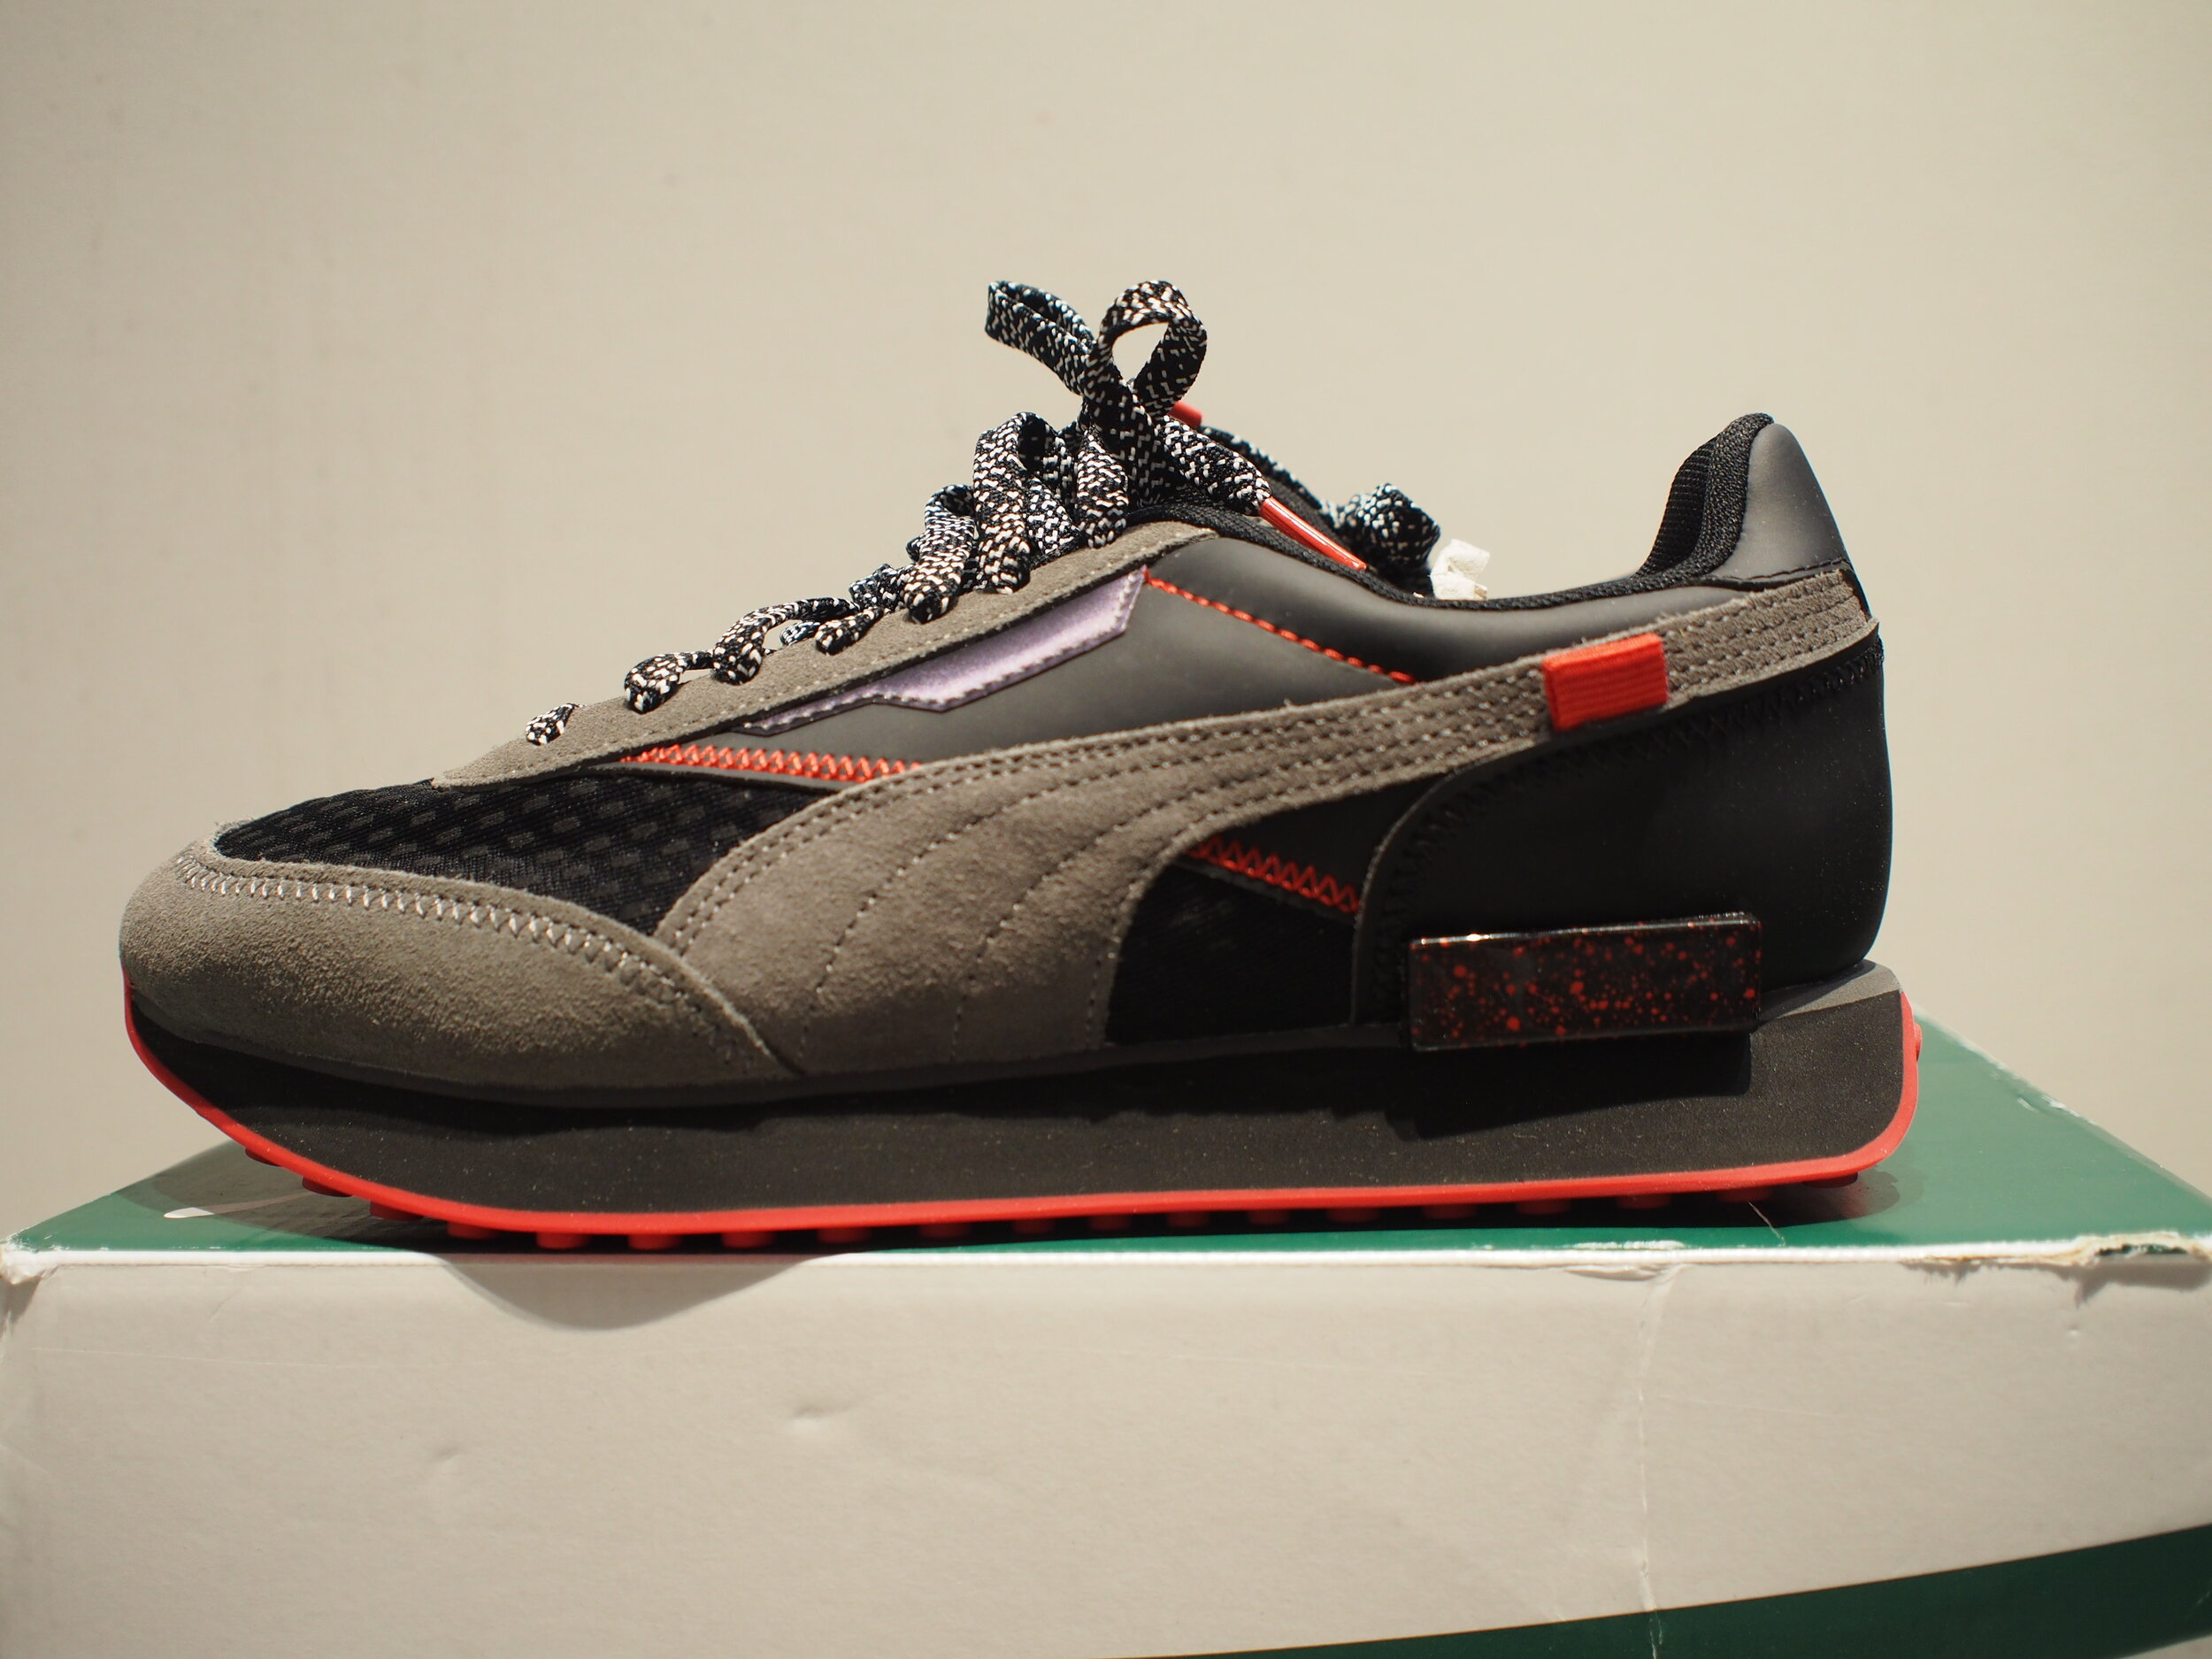 Puma Future Rider Air Plane Mode Lace Up Sneakers Blk Castlerock Red Global Atomic Designs Inc